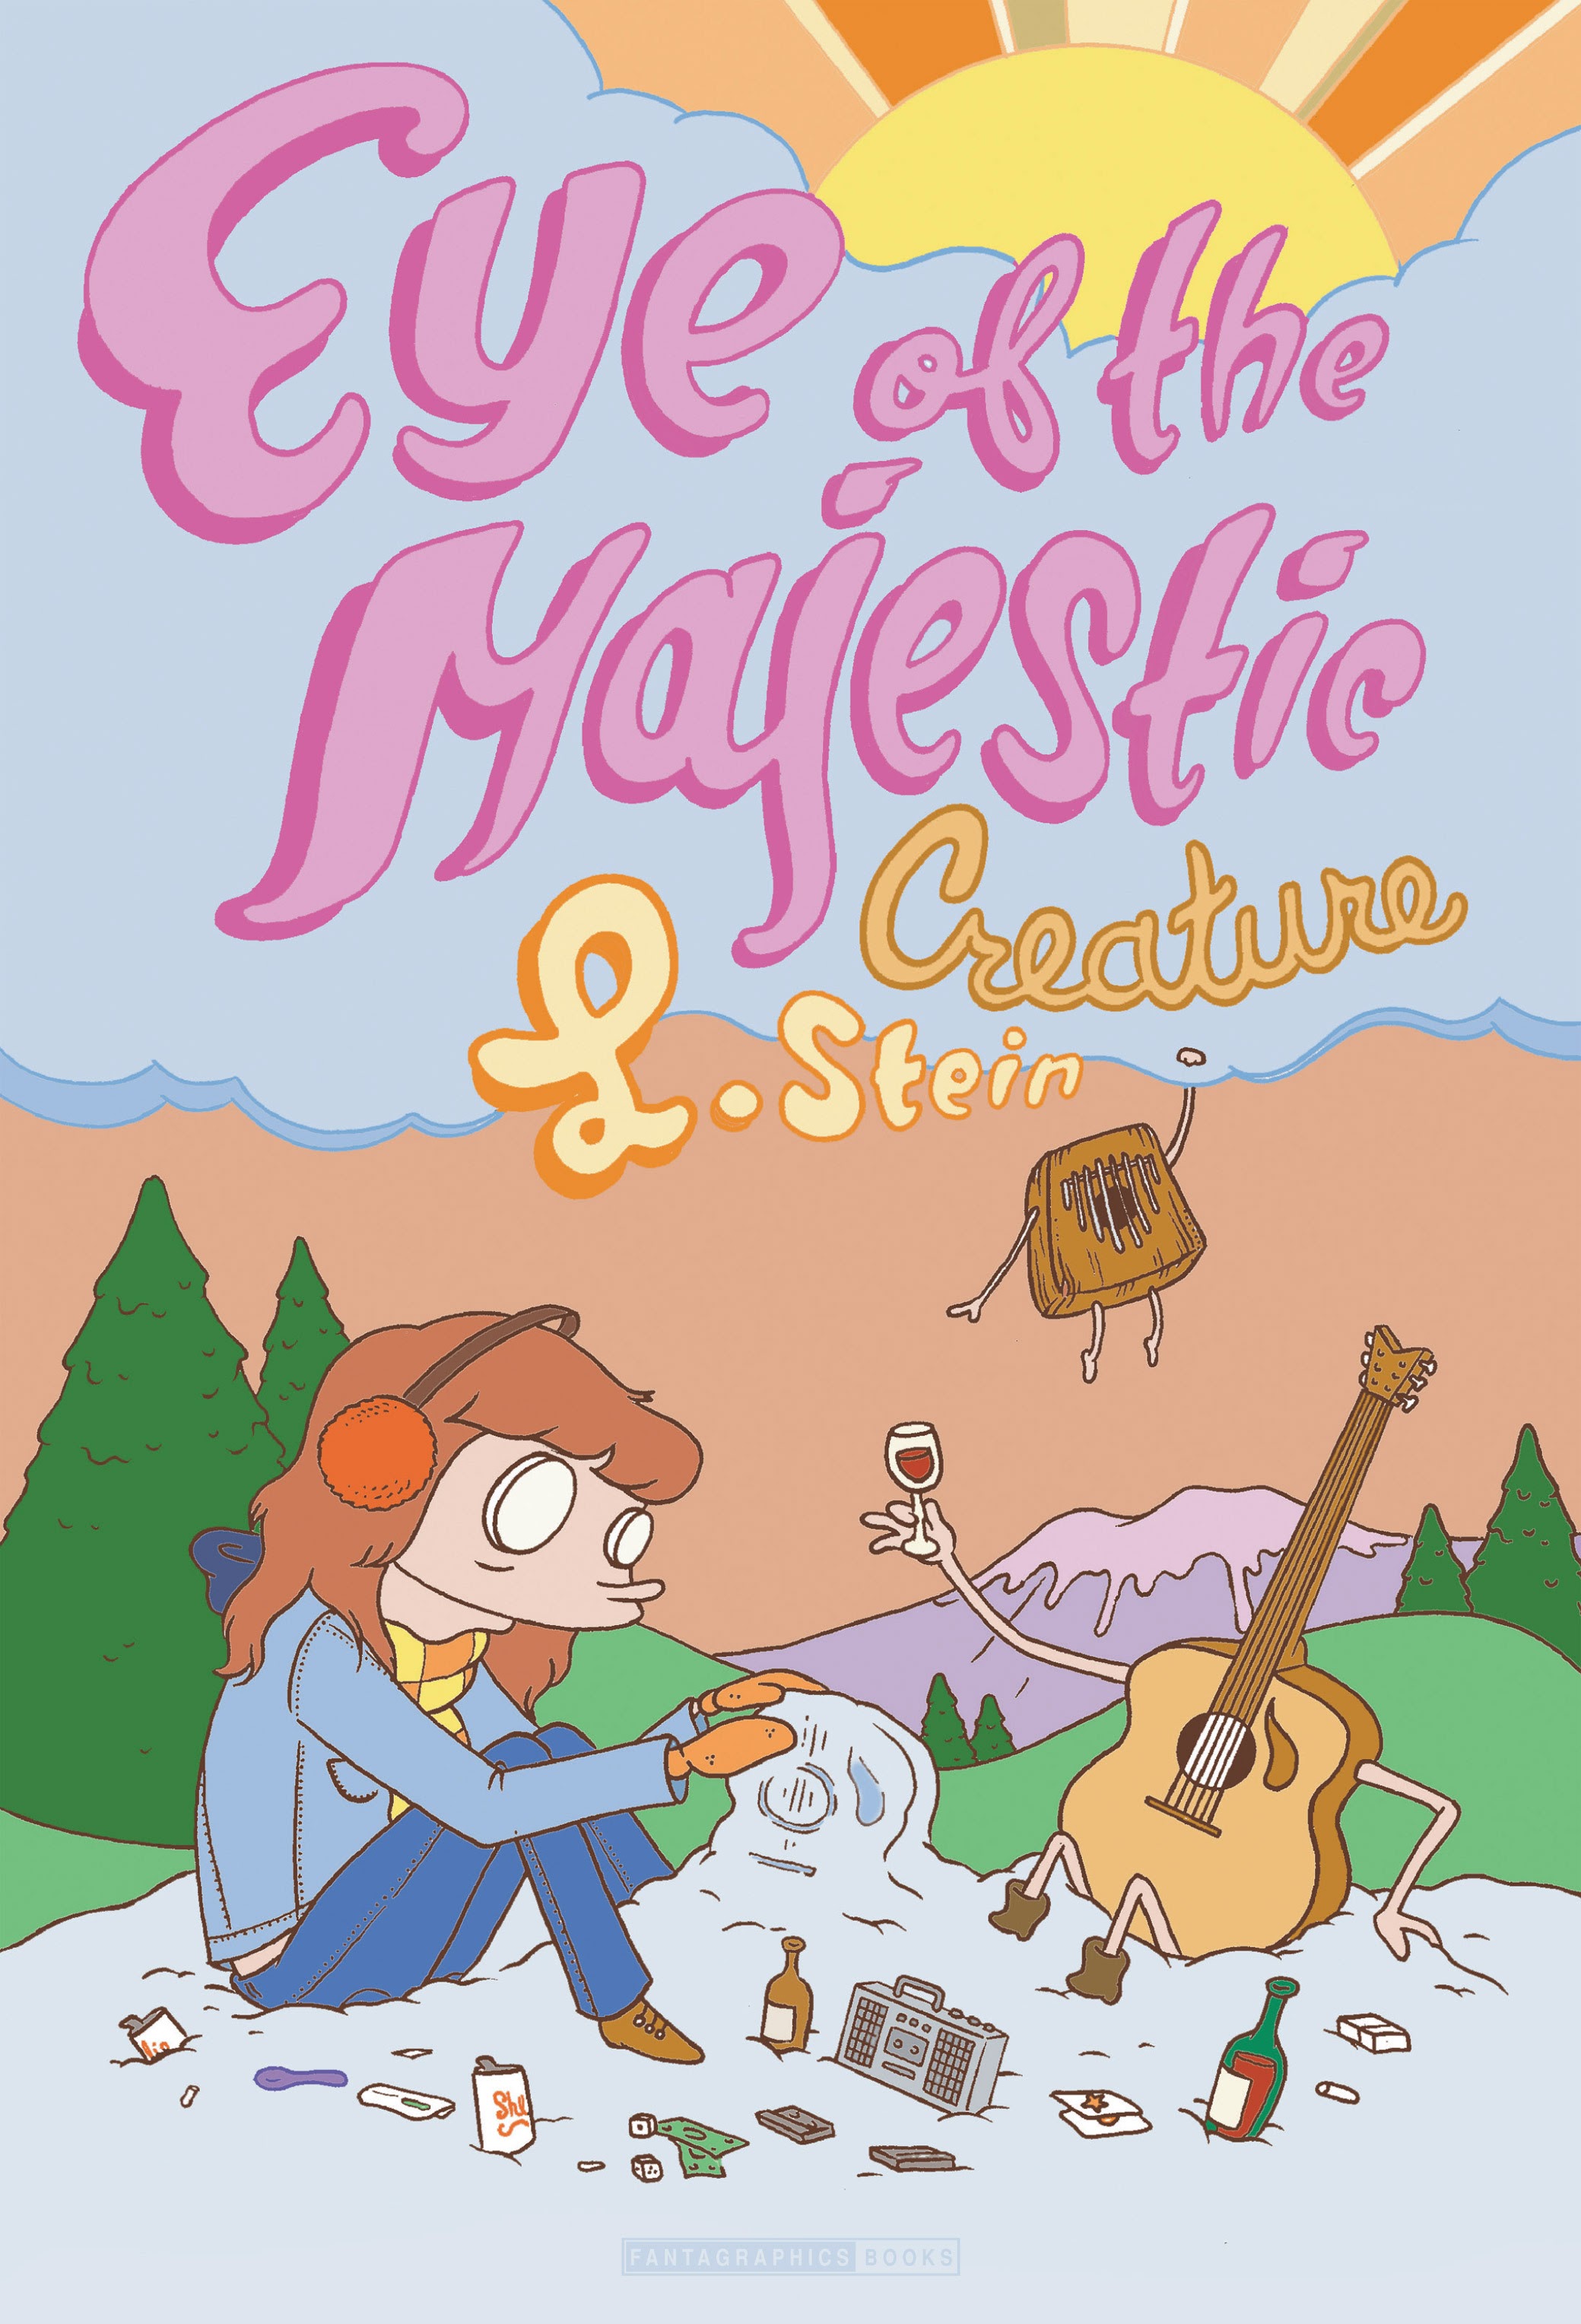 Read online Eye of the Majestic Creature comic -  Issue # TPB 1 - 1